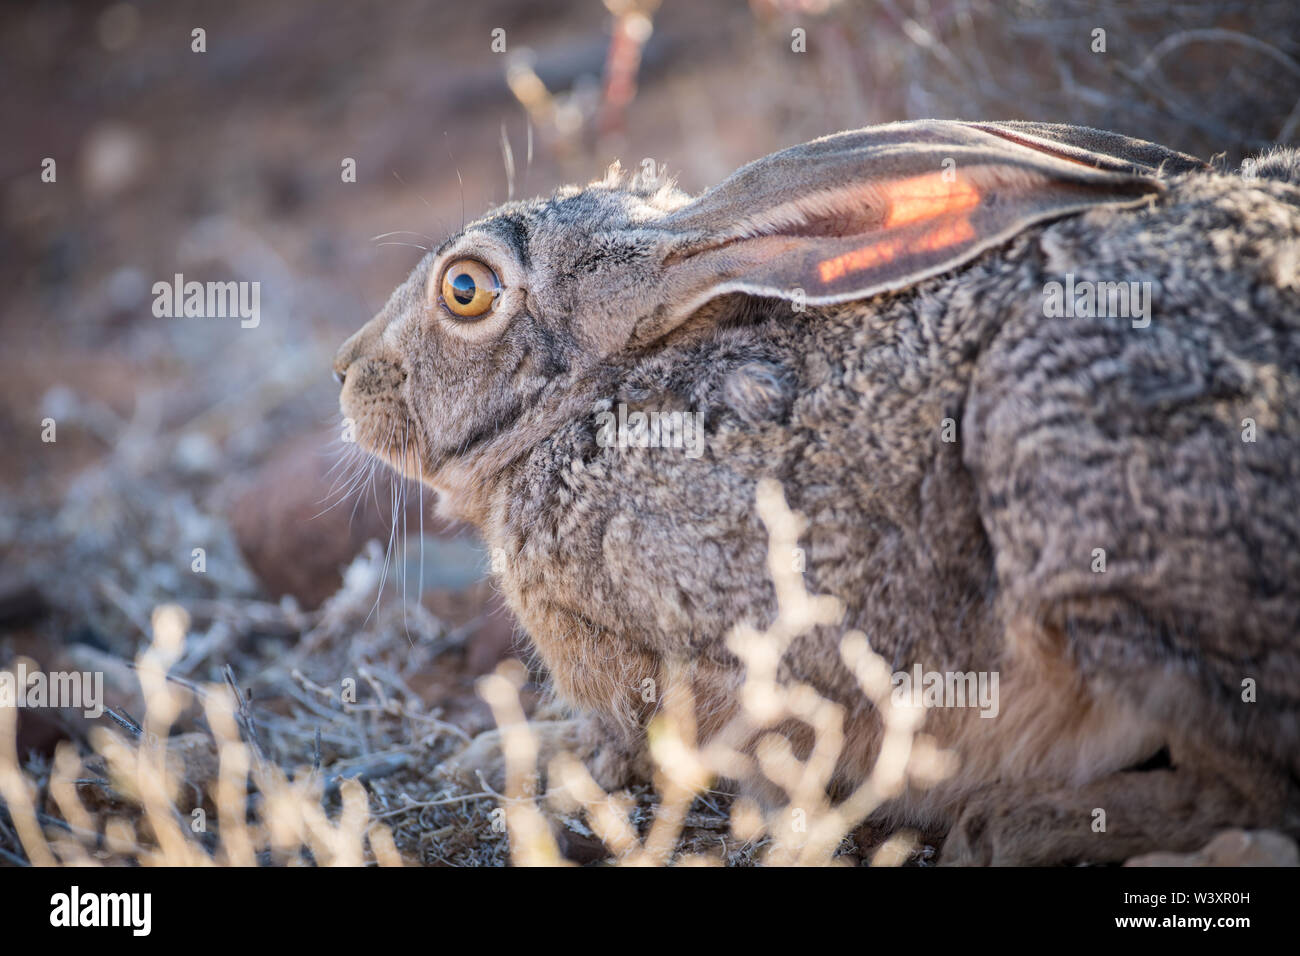 A Cape hare, Lepus capensis, stays frozen in its form, a shallow depression where it rests during the day, Tankwa Karoo National Park, South Africa Stock Photo